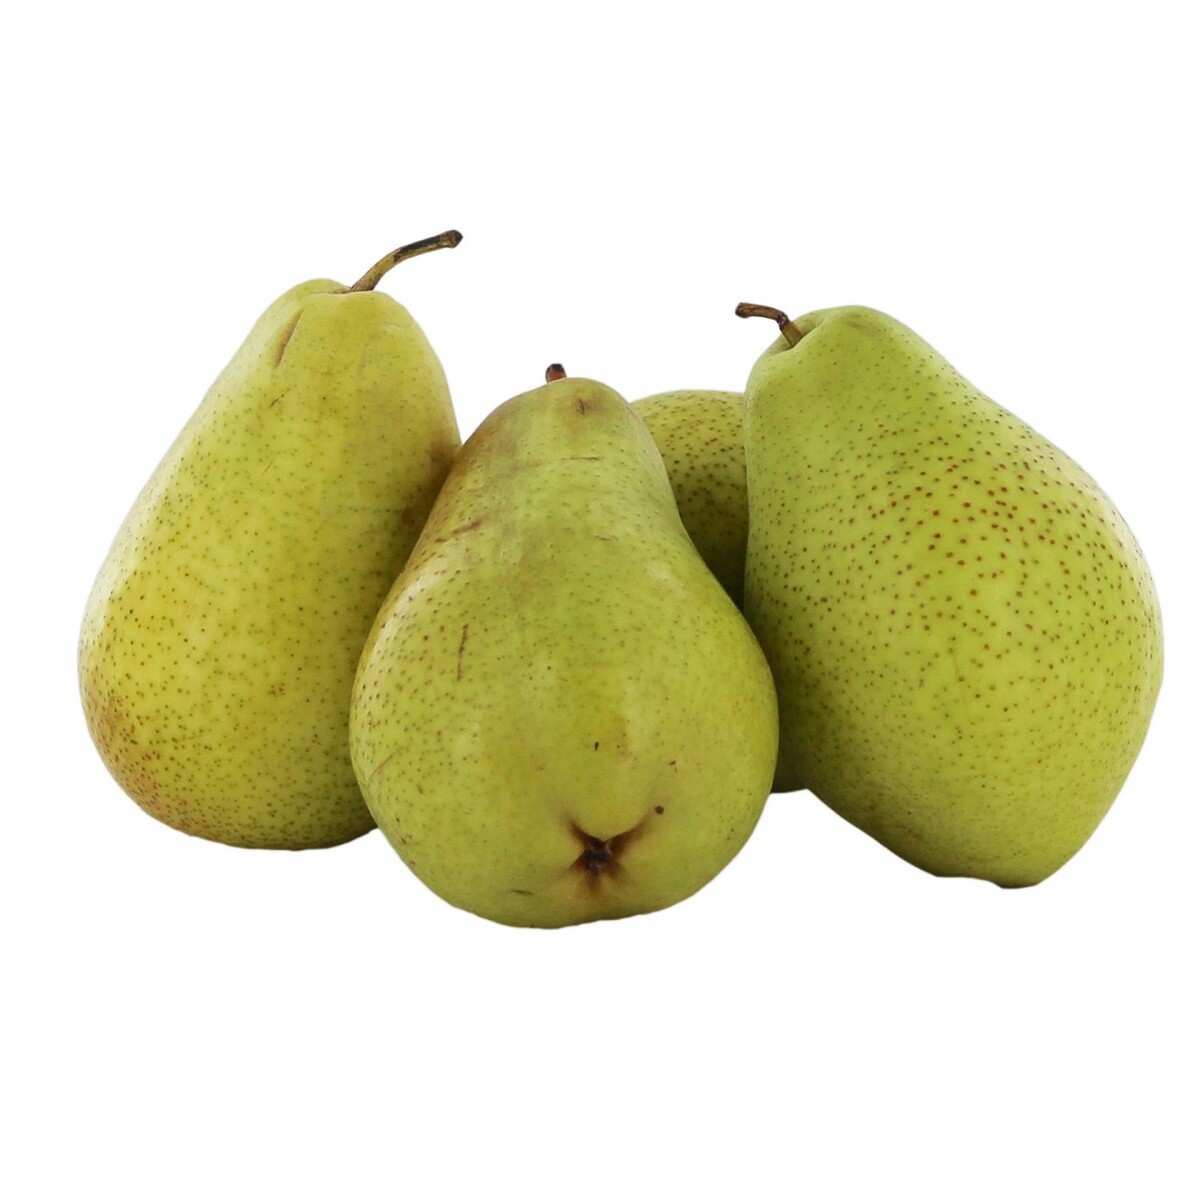 Pears Vermont Beauty  approx. 450gm-500gm